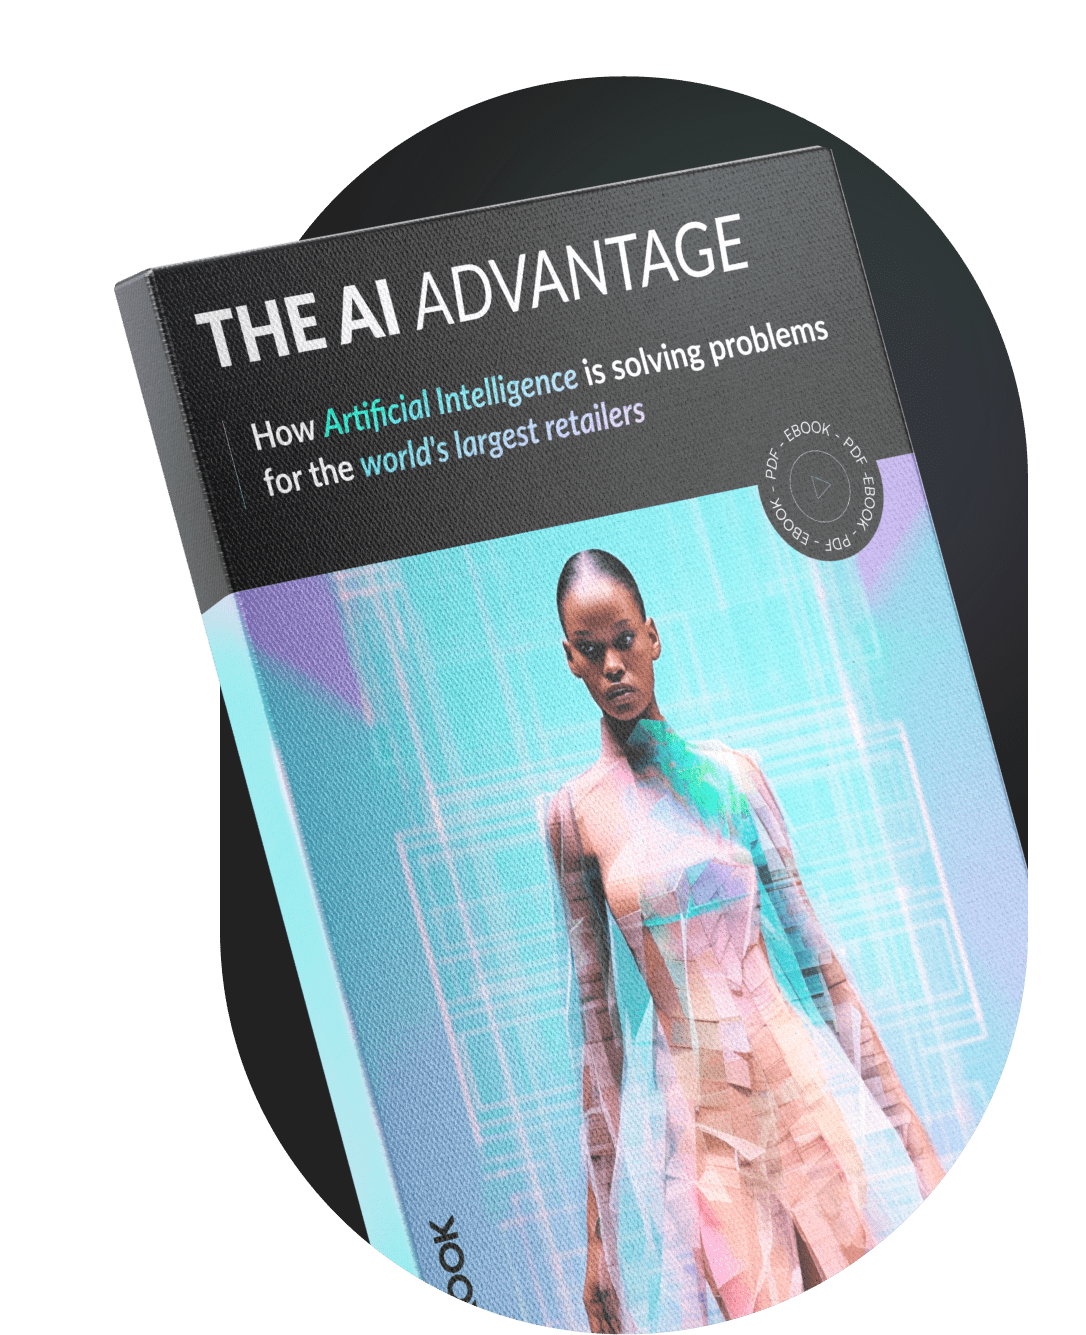 The Artificial Intelligence Advantage book cover showcases the advantages of AI in the retail industry.